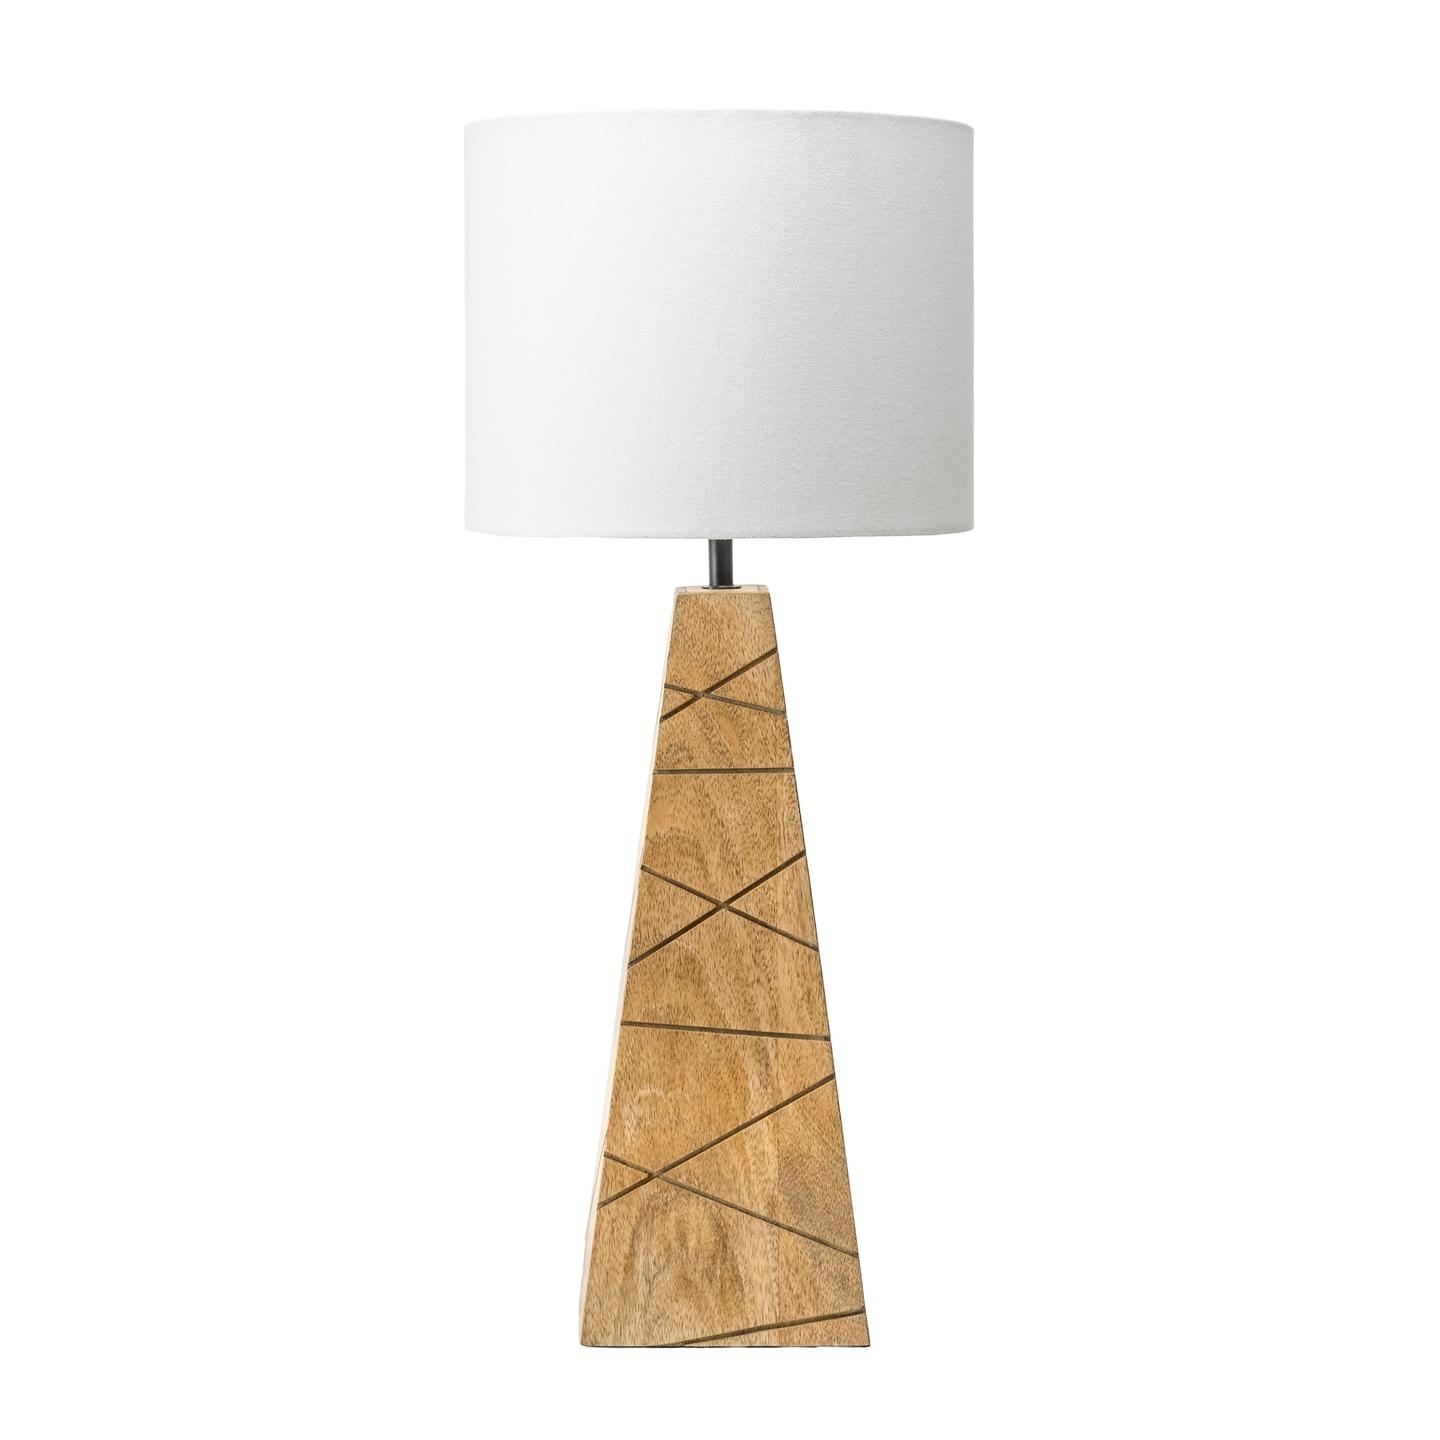 Lily 24" Wood Table Lamp - Image 2